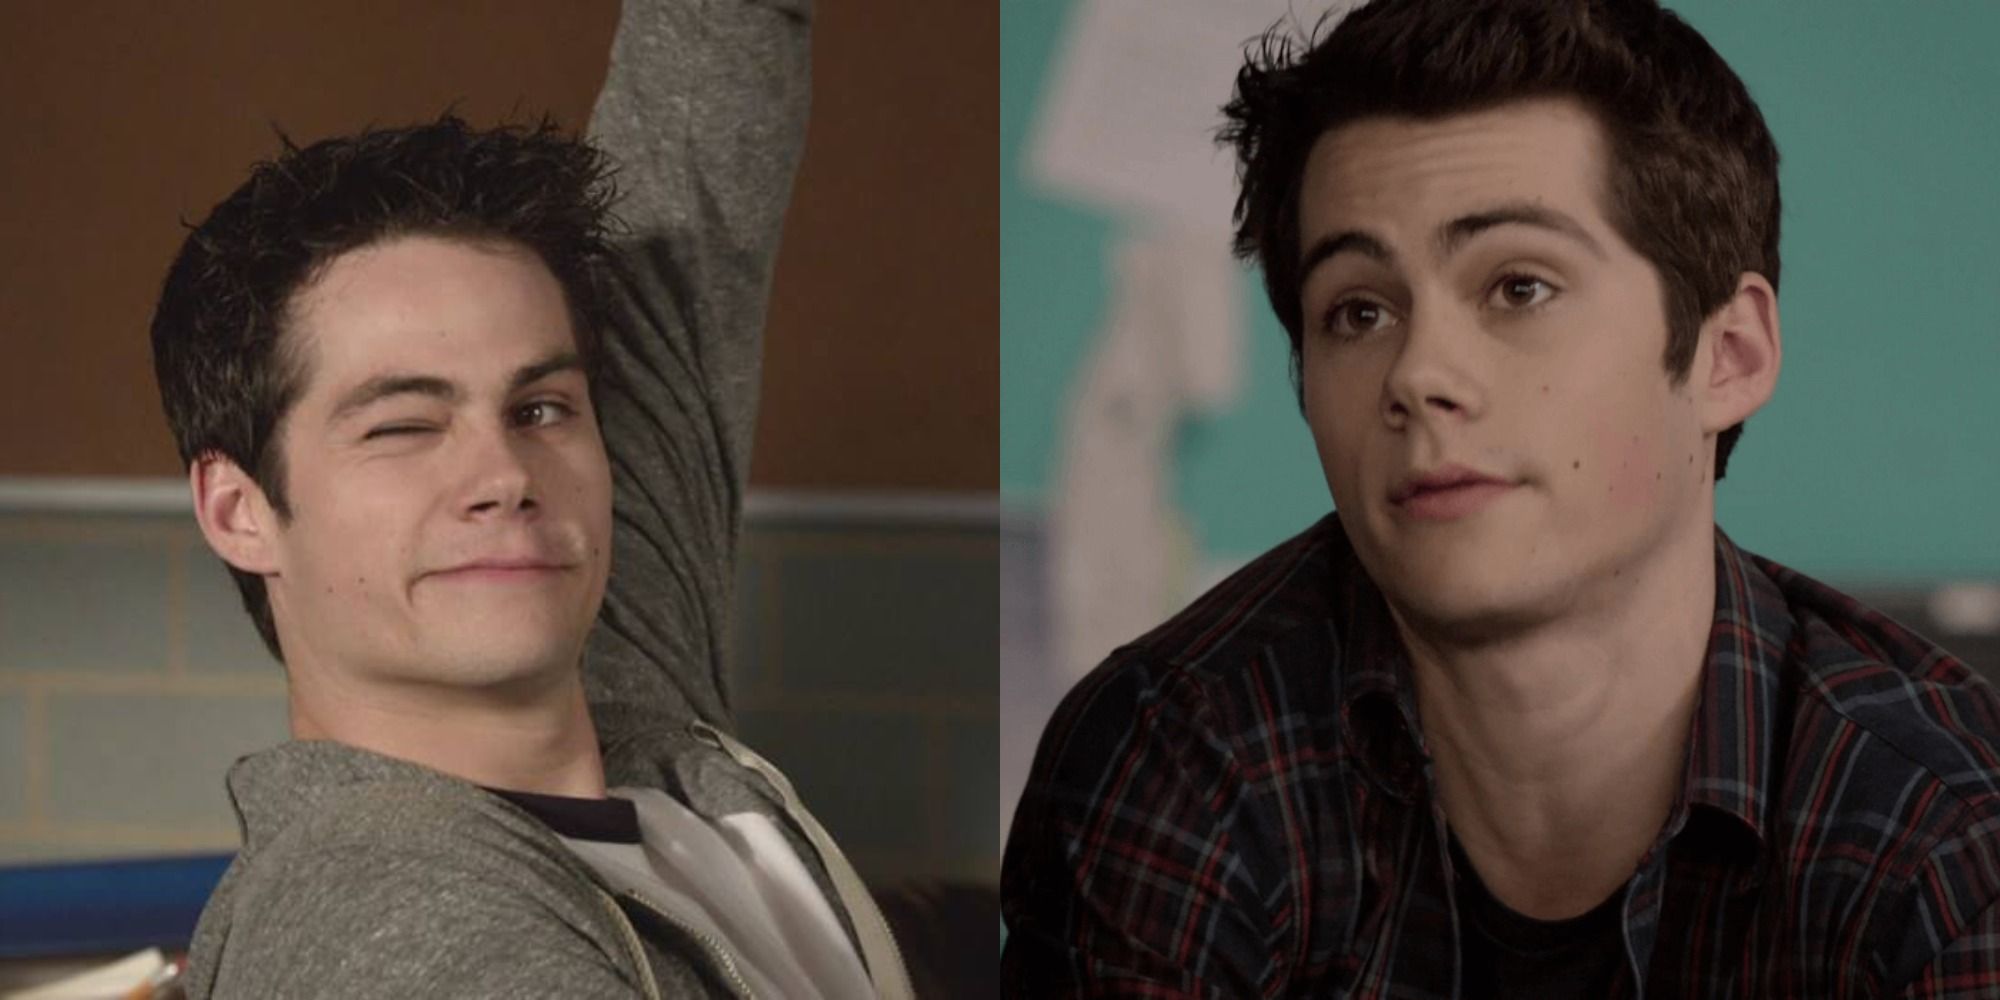 Teen Wolf: 10 Stiles Stilinski Quotes That Are Ridiculously Meme-Worthy